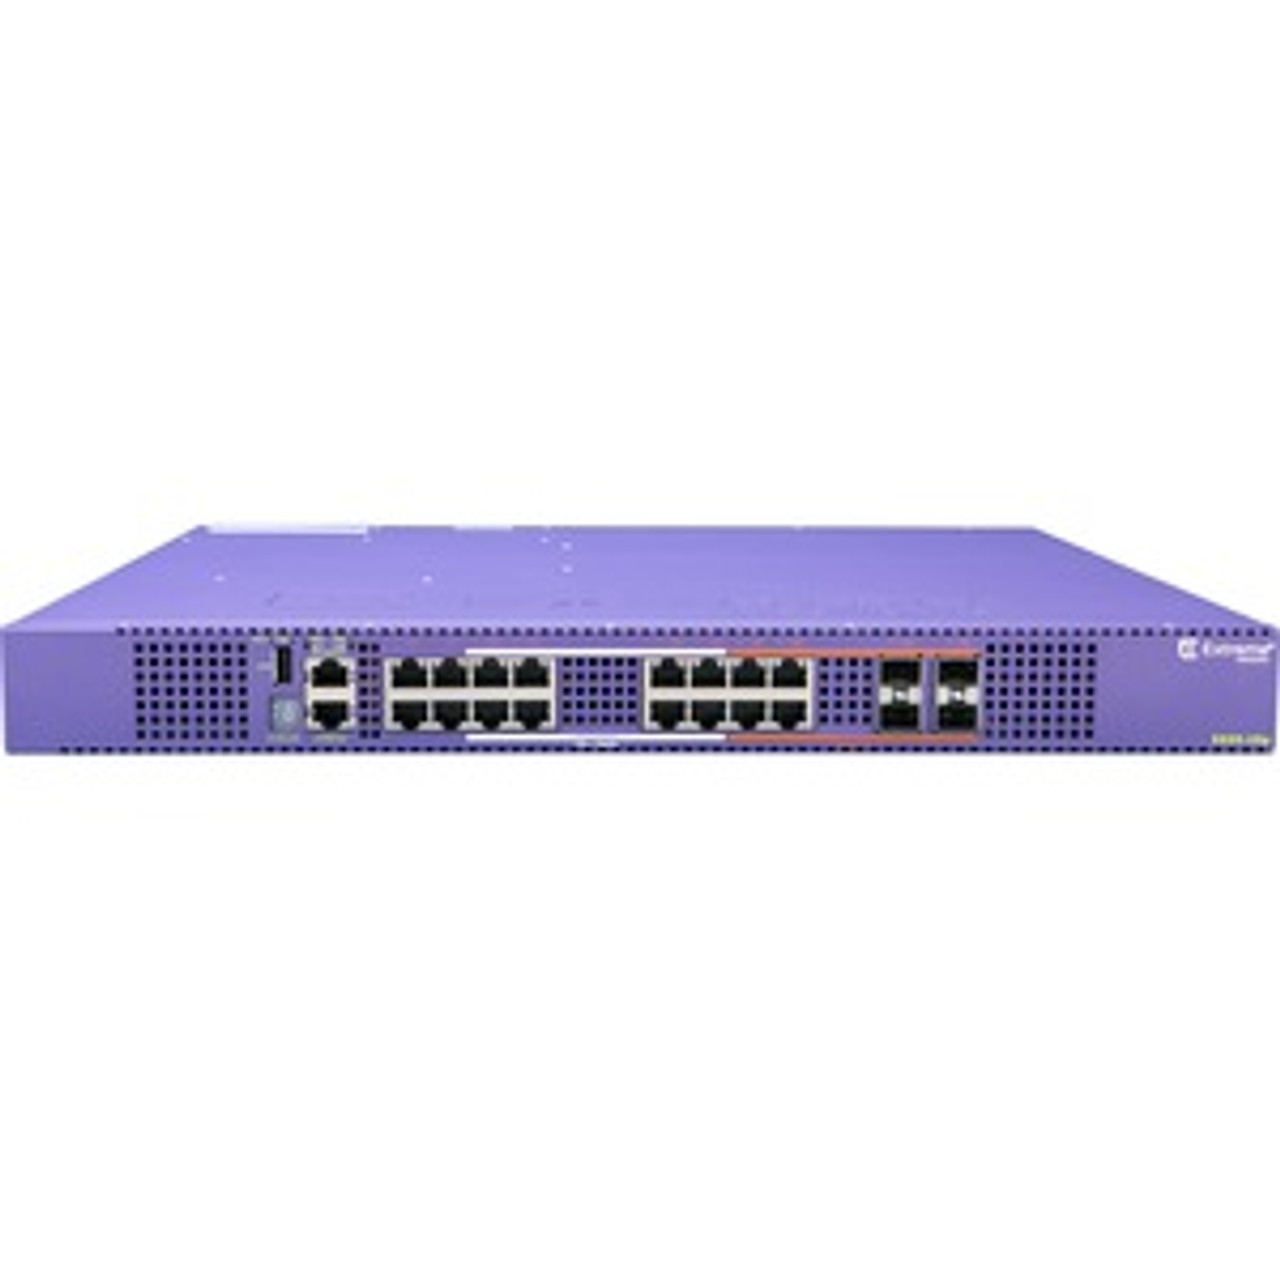 17403 Extreme Networks X620-16p Ethernet Switch - 16 Ports - Manageable - 10 Gigabit Ethernet - 10GBase-T - 3 Layer Supported - Modular - Power Supply -